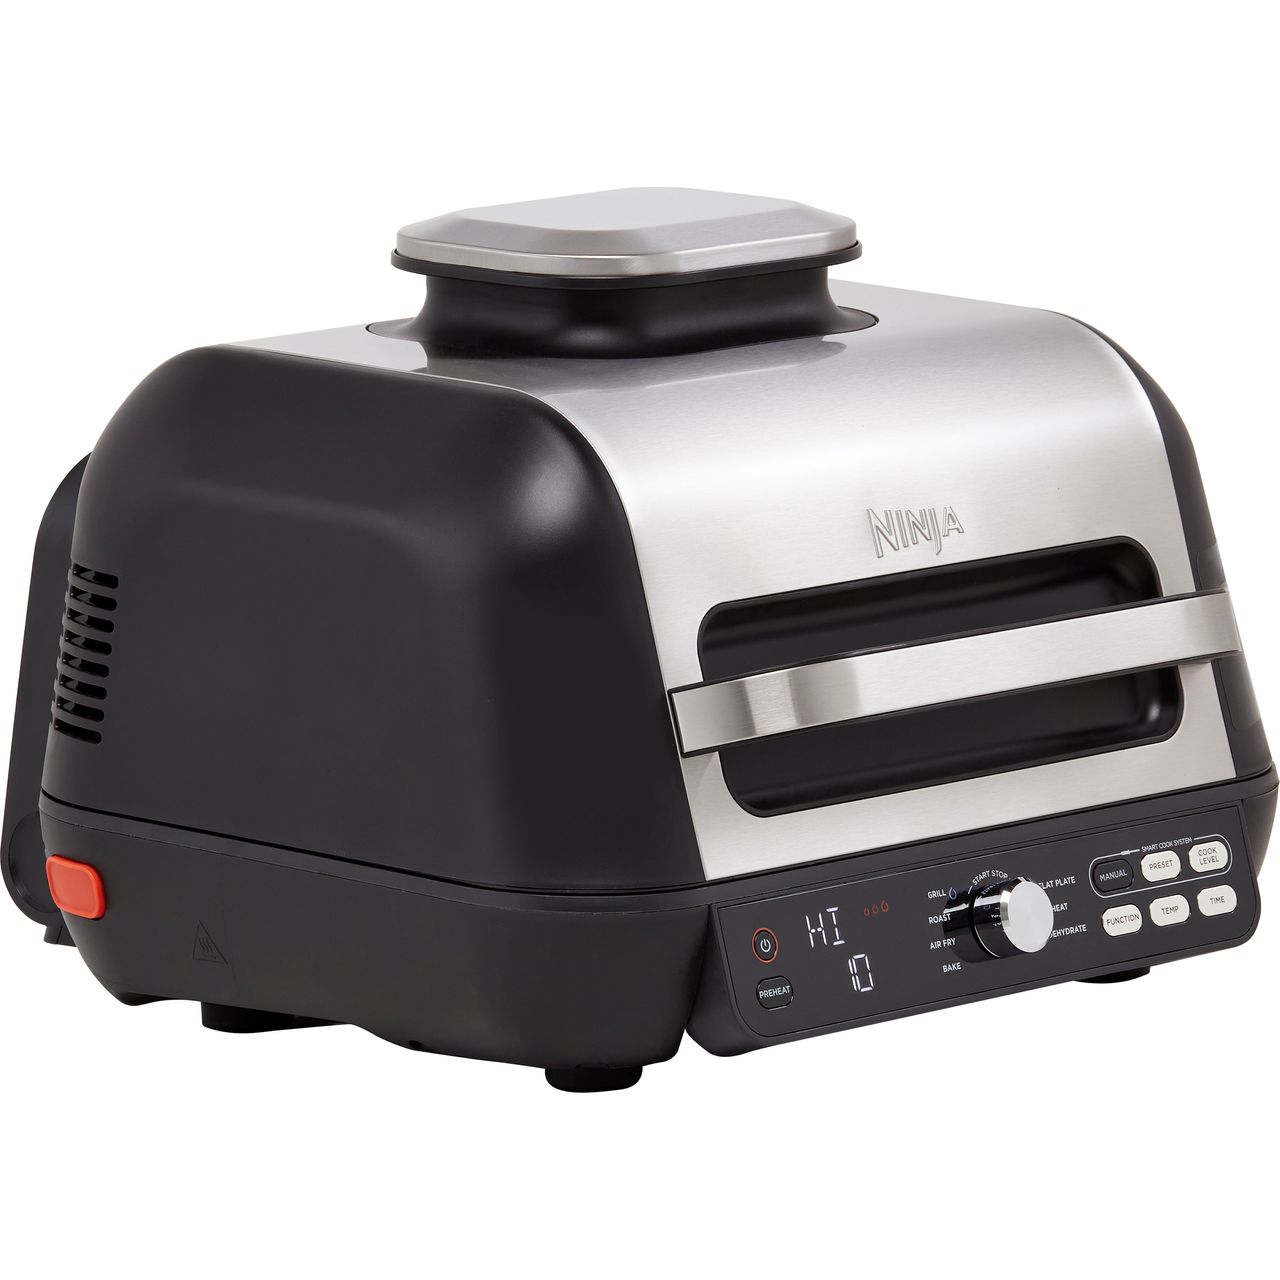 Ninja Foodi MAX Pro Health grill, flat plate and air-fryer AG651UK - Review